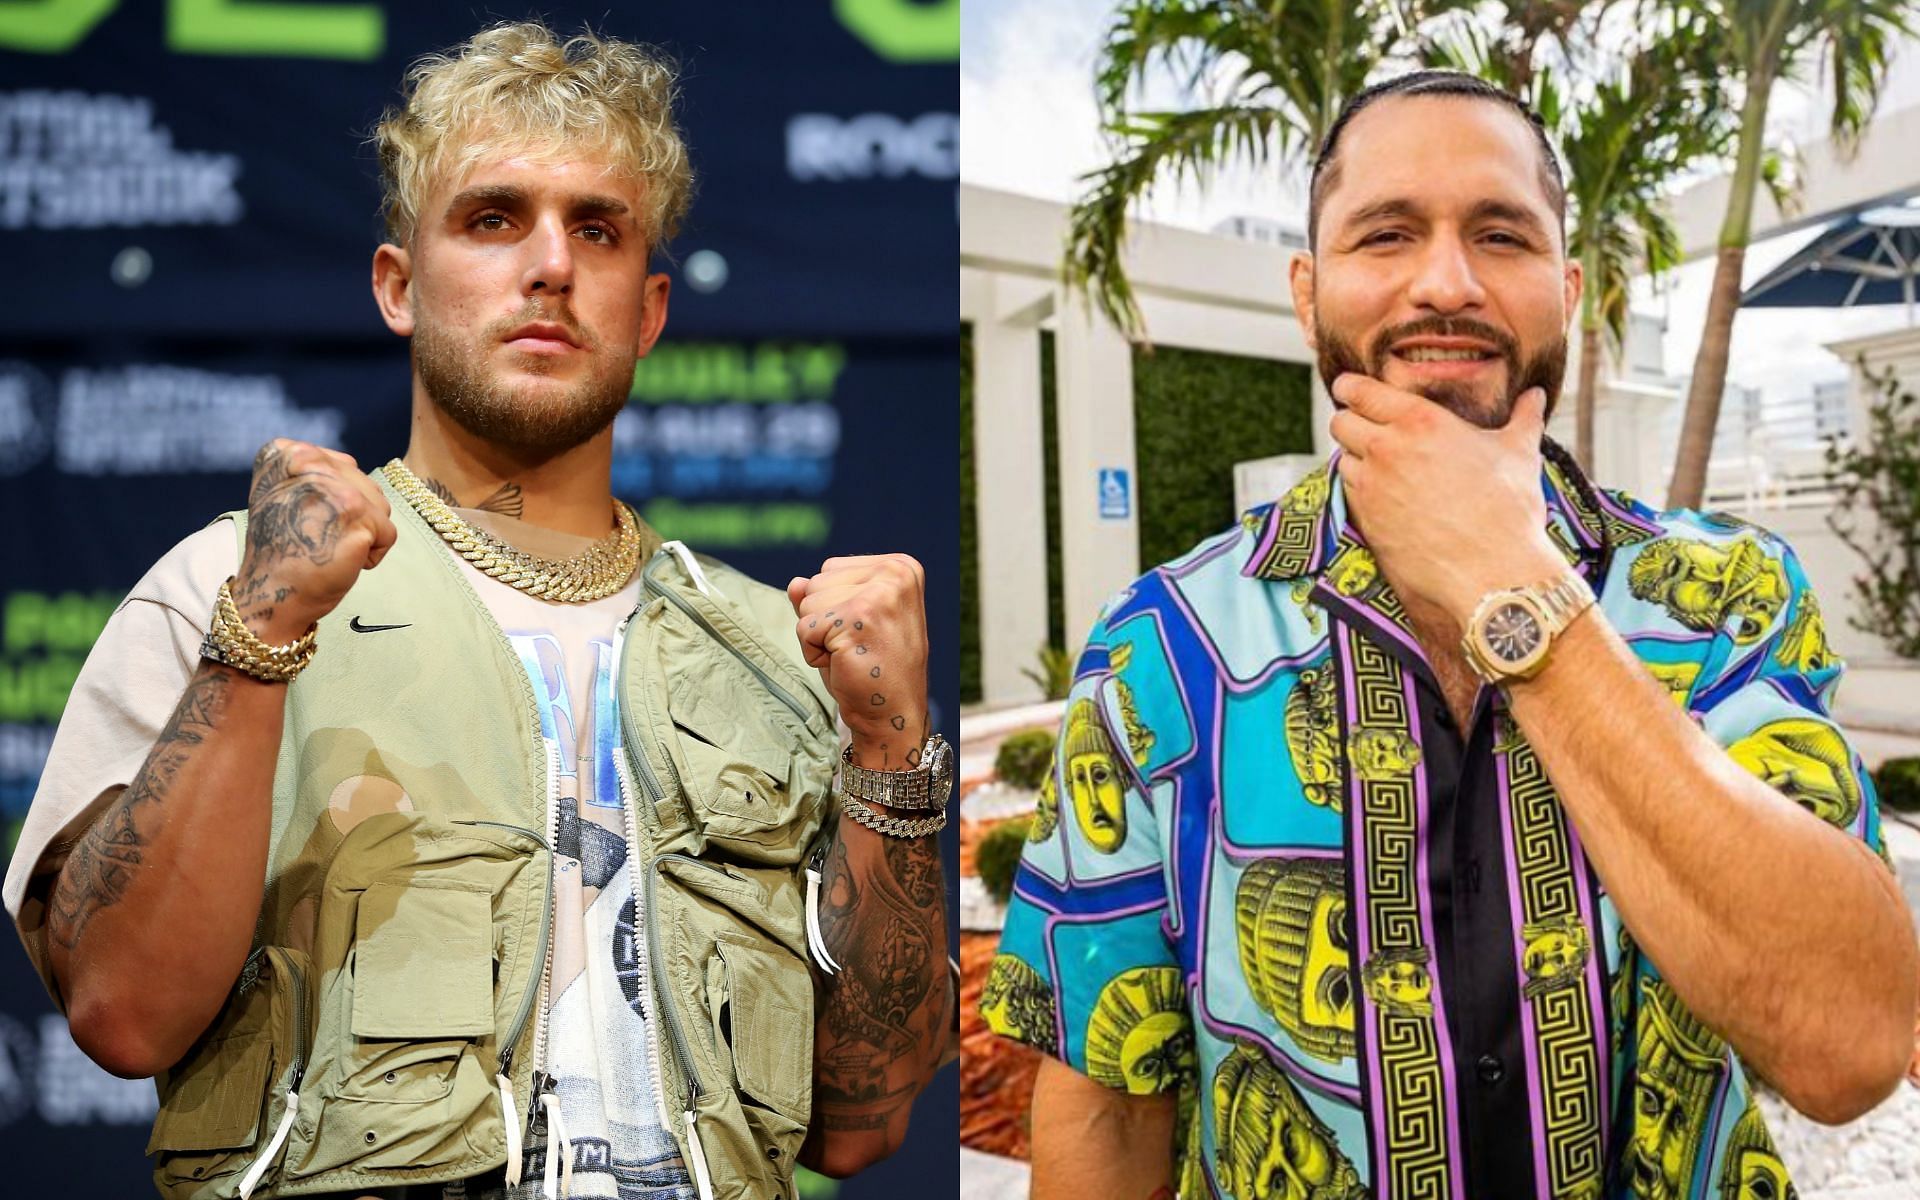 Jake Paul (left) and Jorge Masvidal (right) [Image credits: Getty Images and @gamebredfighter on Instagram]